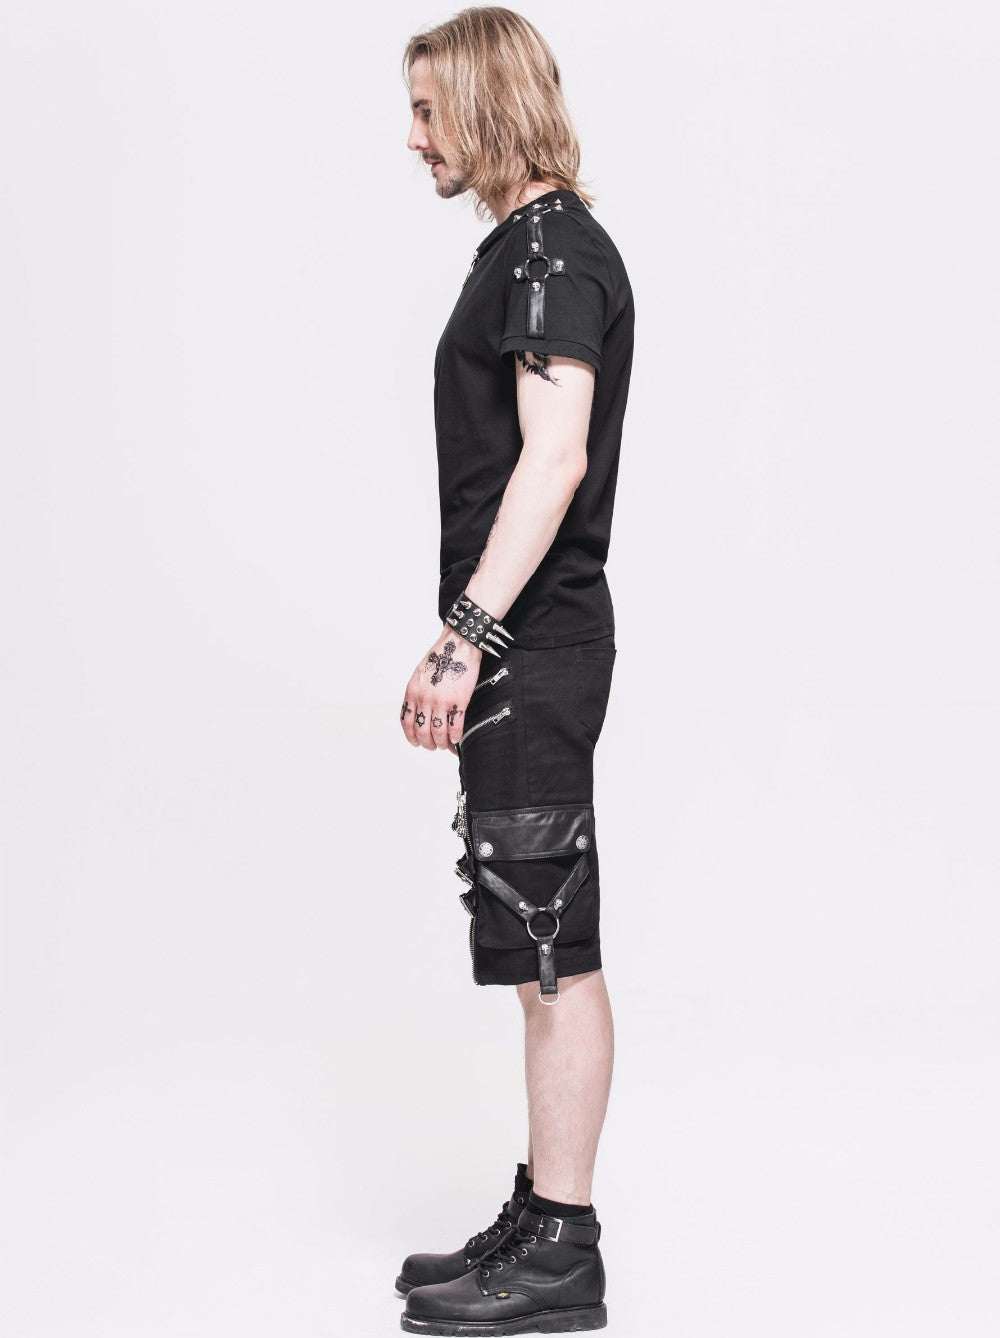 Black Rock Style Shorts / Men's Alternative Fashion Gothic Outfits / Punk Clothes - HARD'N'HEAVY